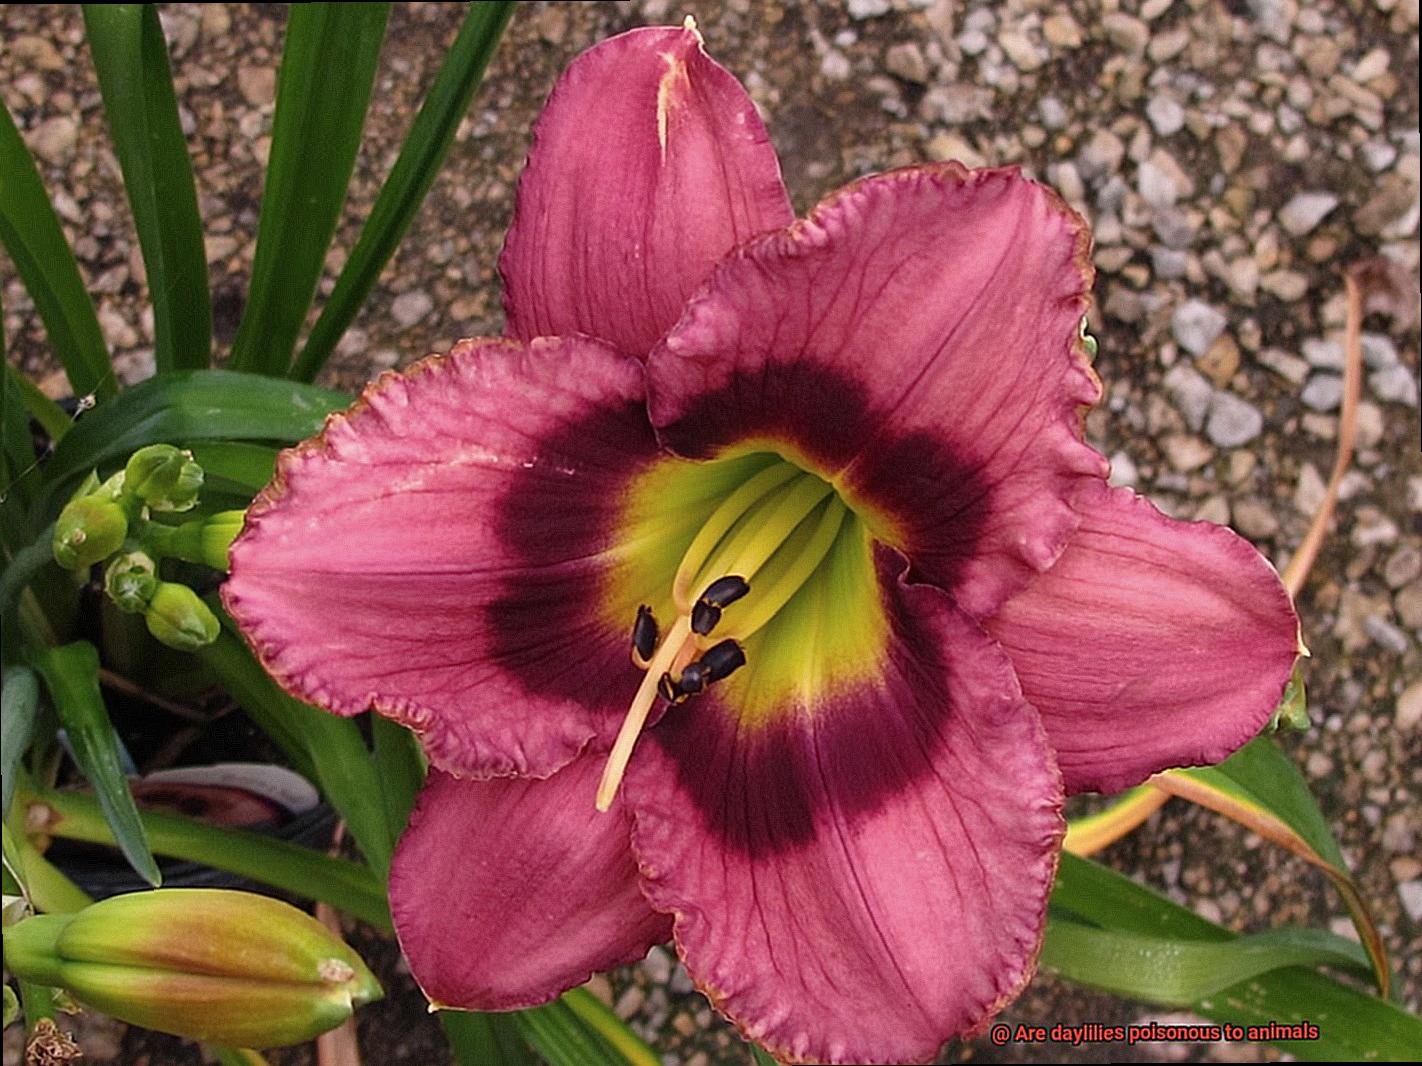 Are daylilies poisonous to animals-4